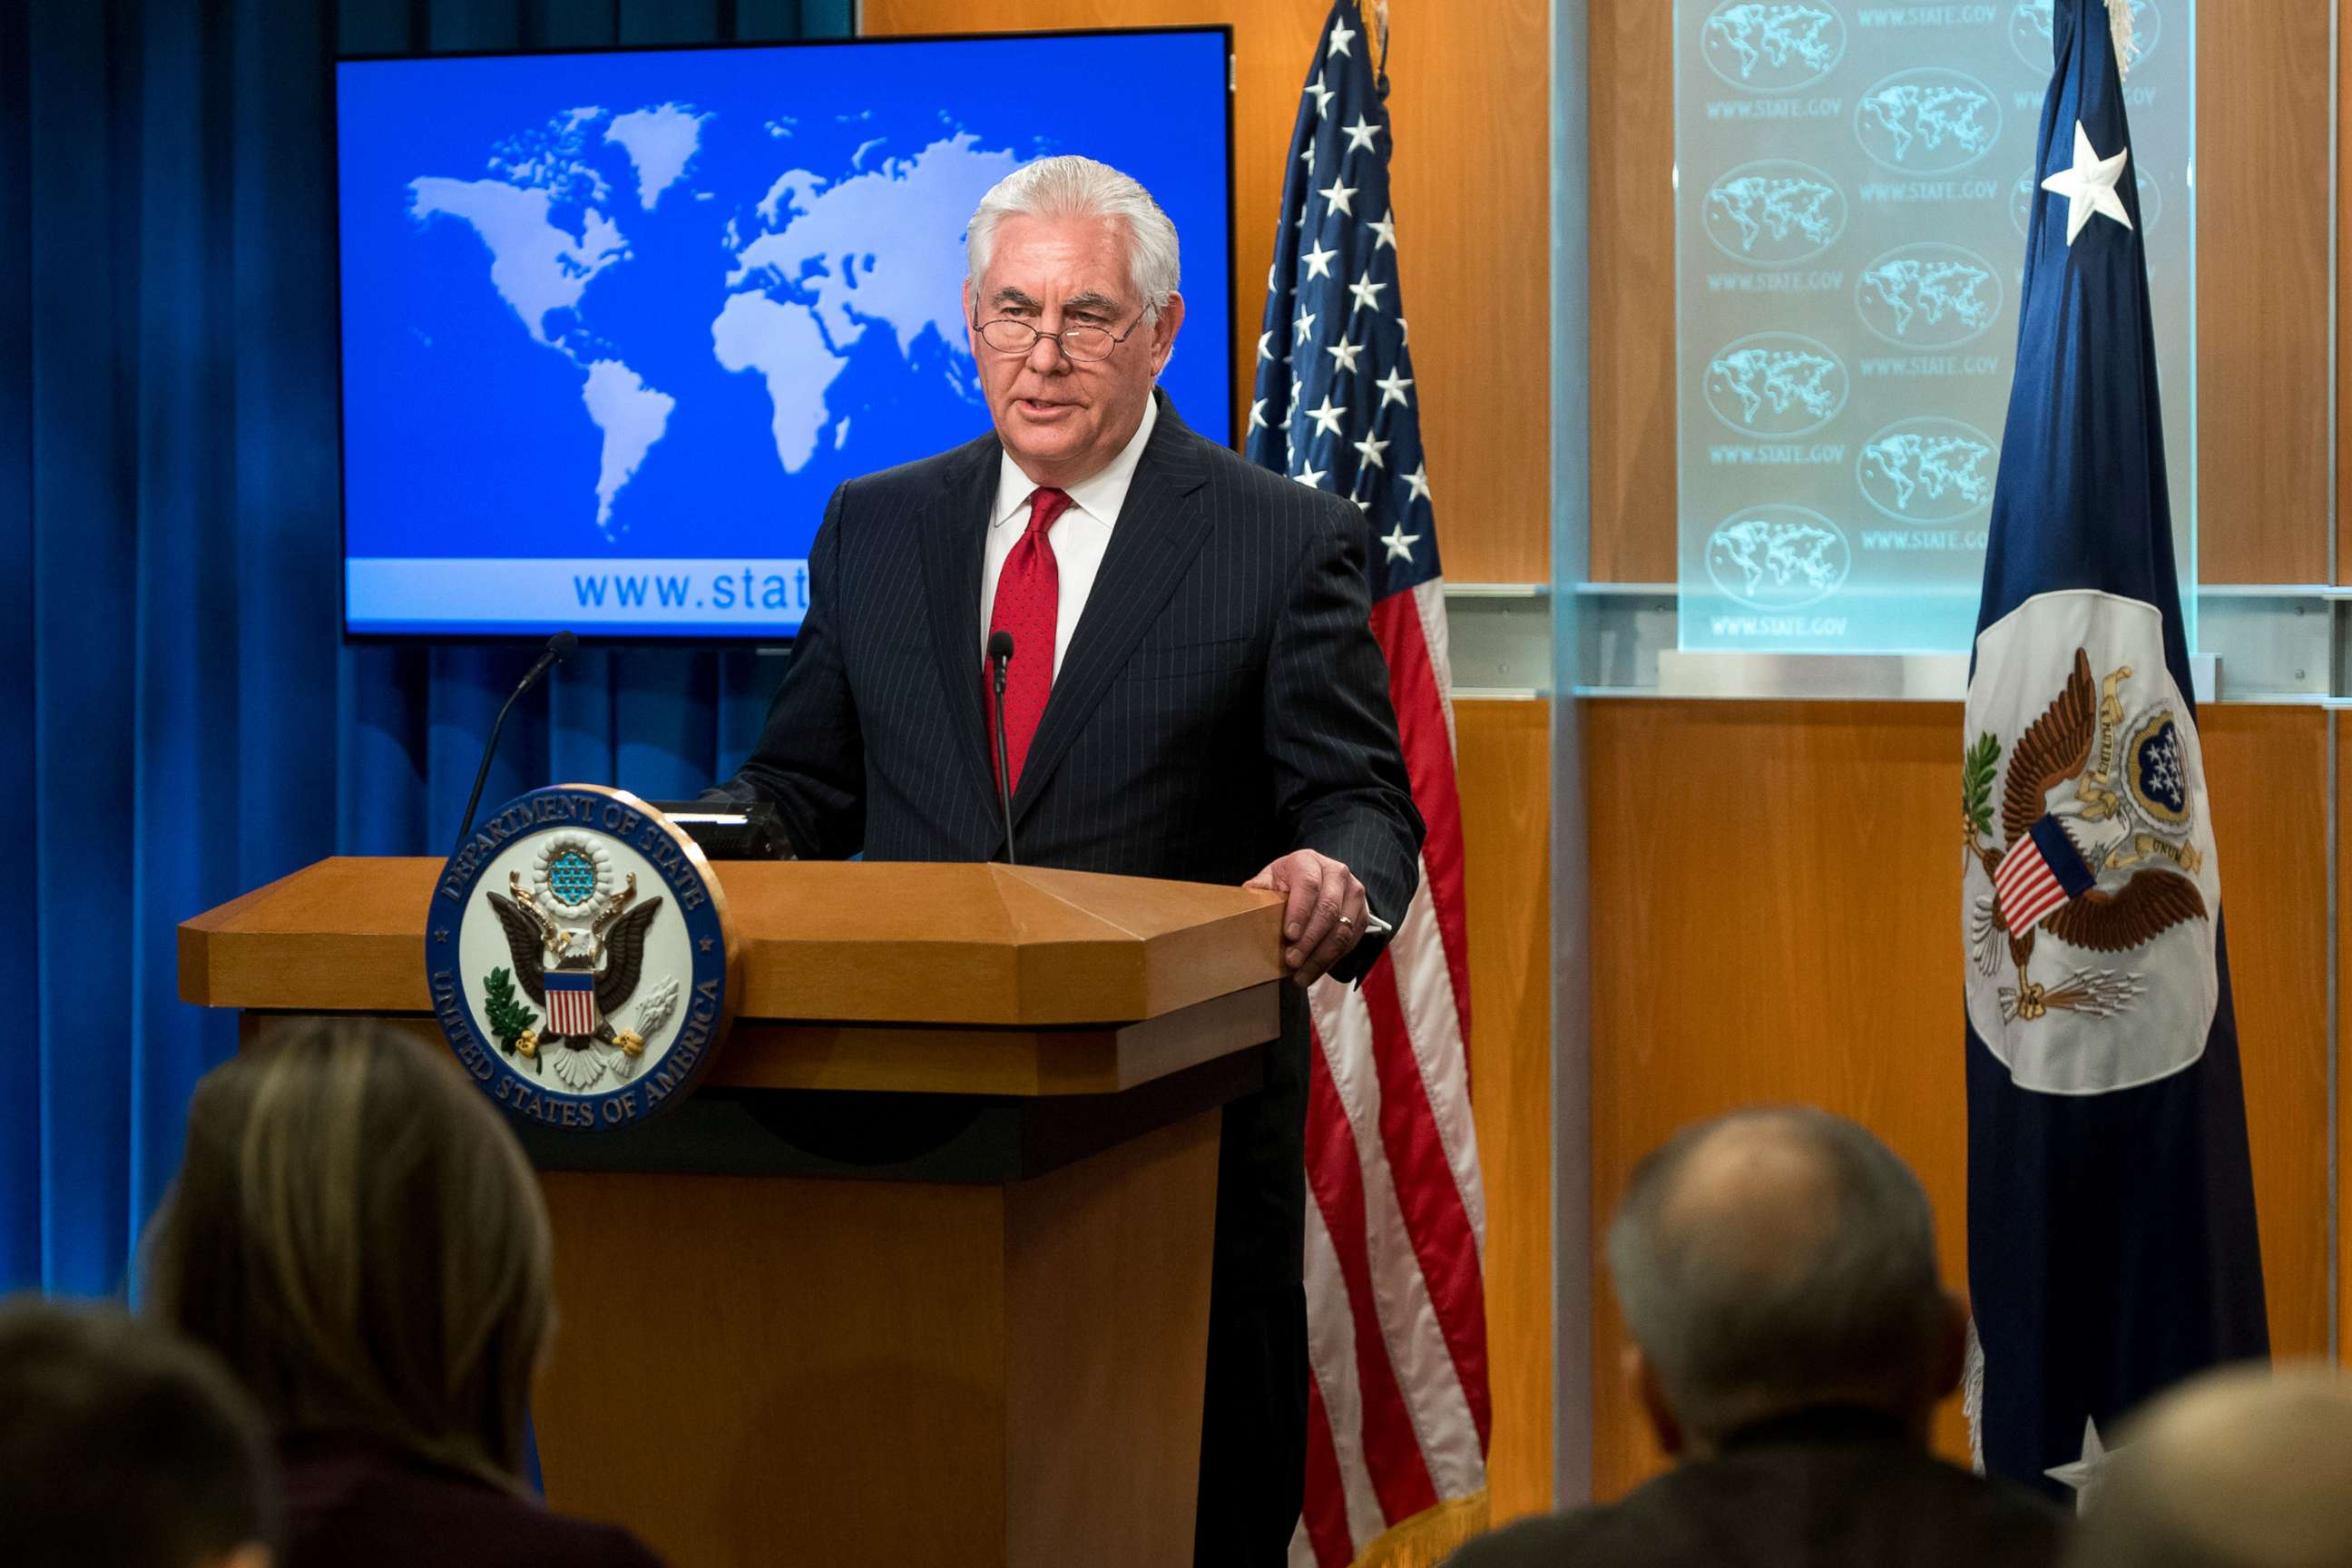 PHOTO: Rex Tillerson, outgoing US Secretary of State makes a statement after his dismissal at the State Department in Washington, D.C. on March 13, 2018.